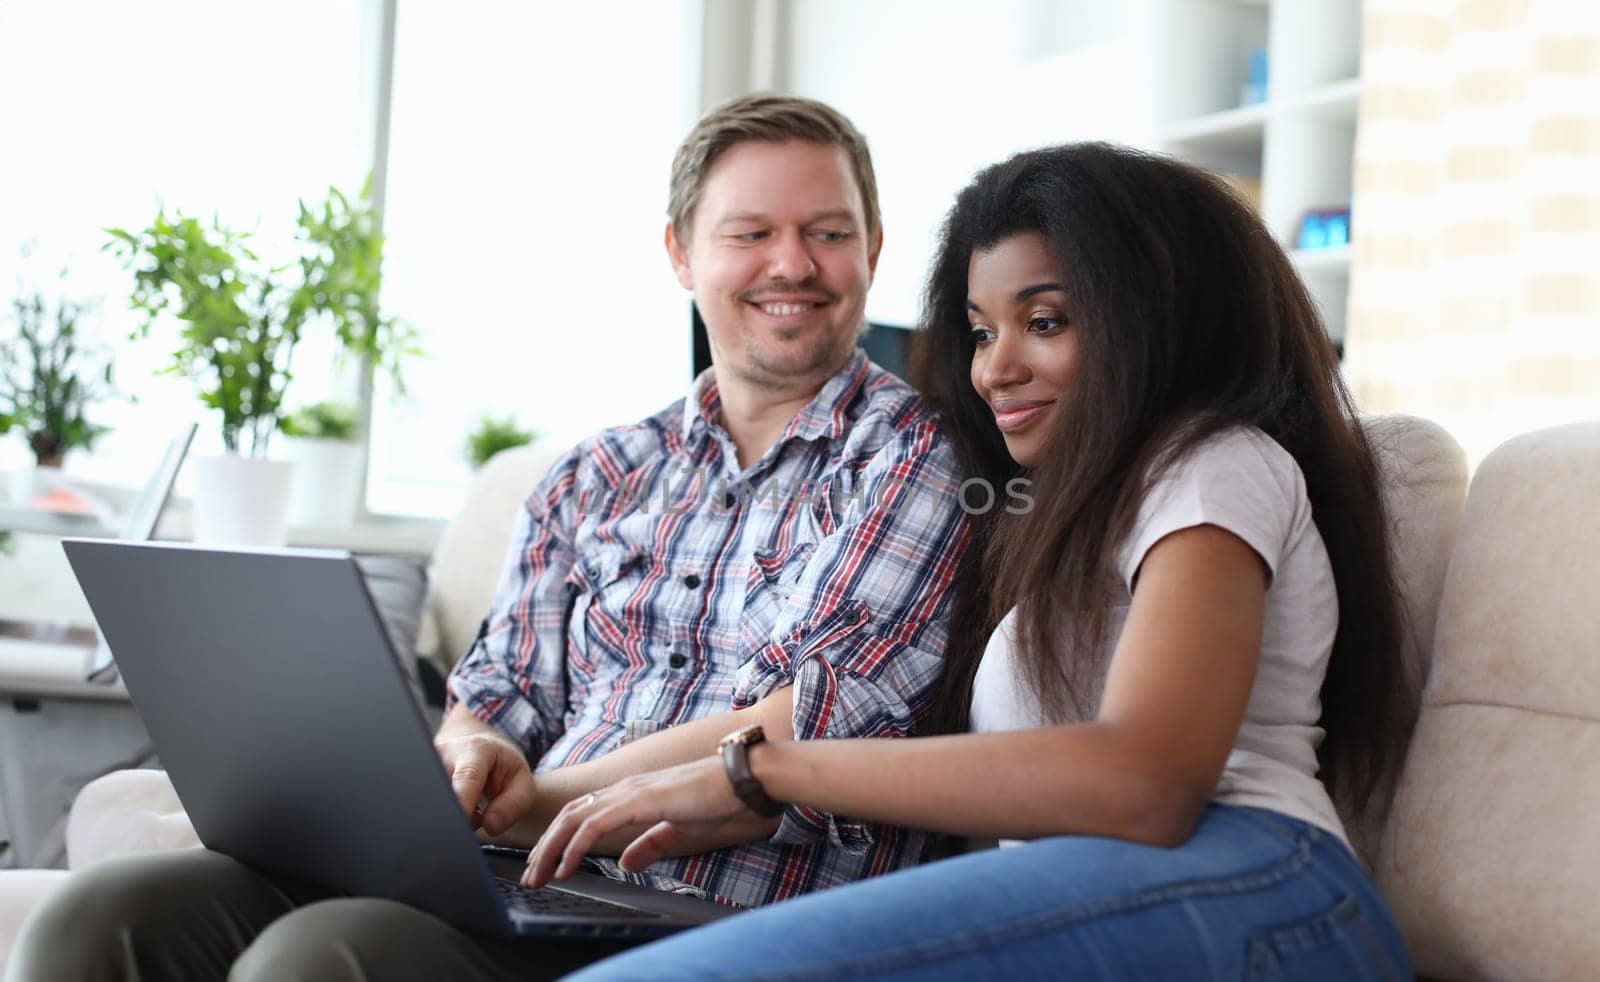 Portrait of couple sitting on sofa and choosing what film to watch. Afro-american young woman using laptop. Happy smiling middle-aged man. Relationship and quality time concept